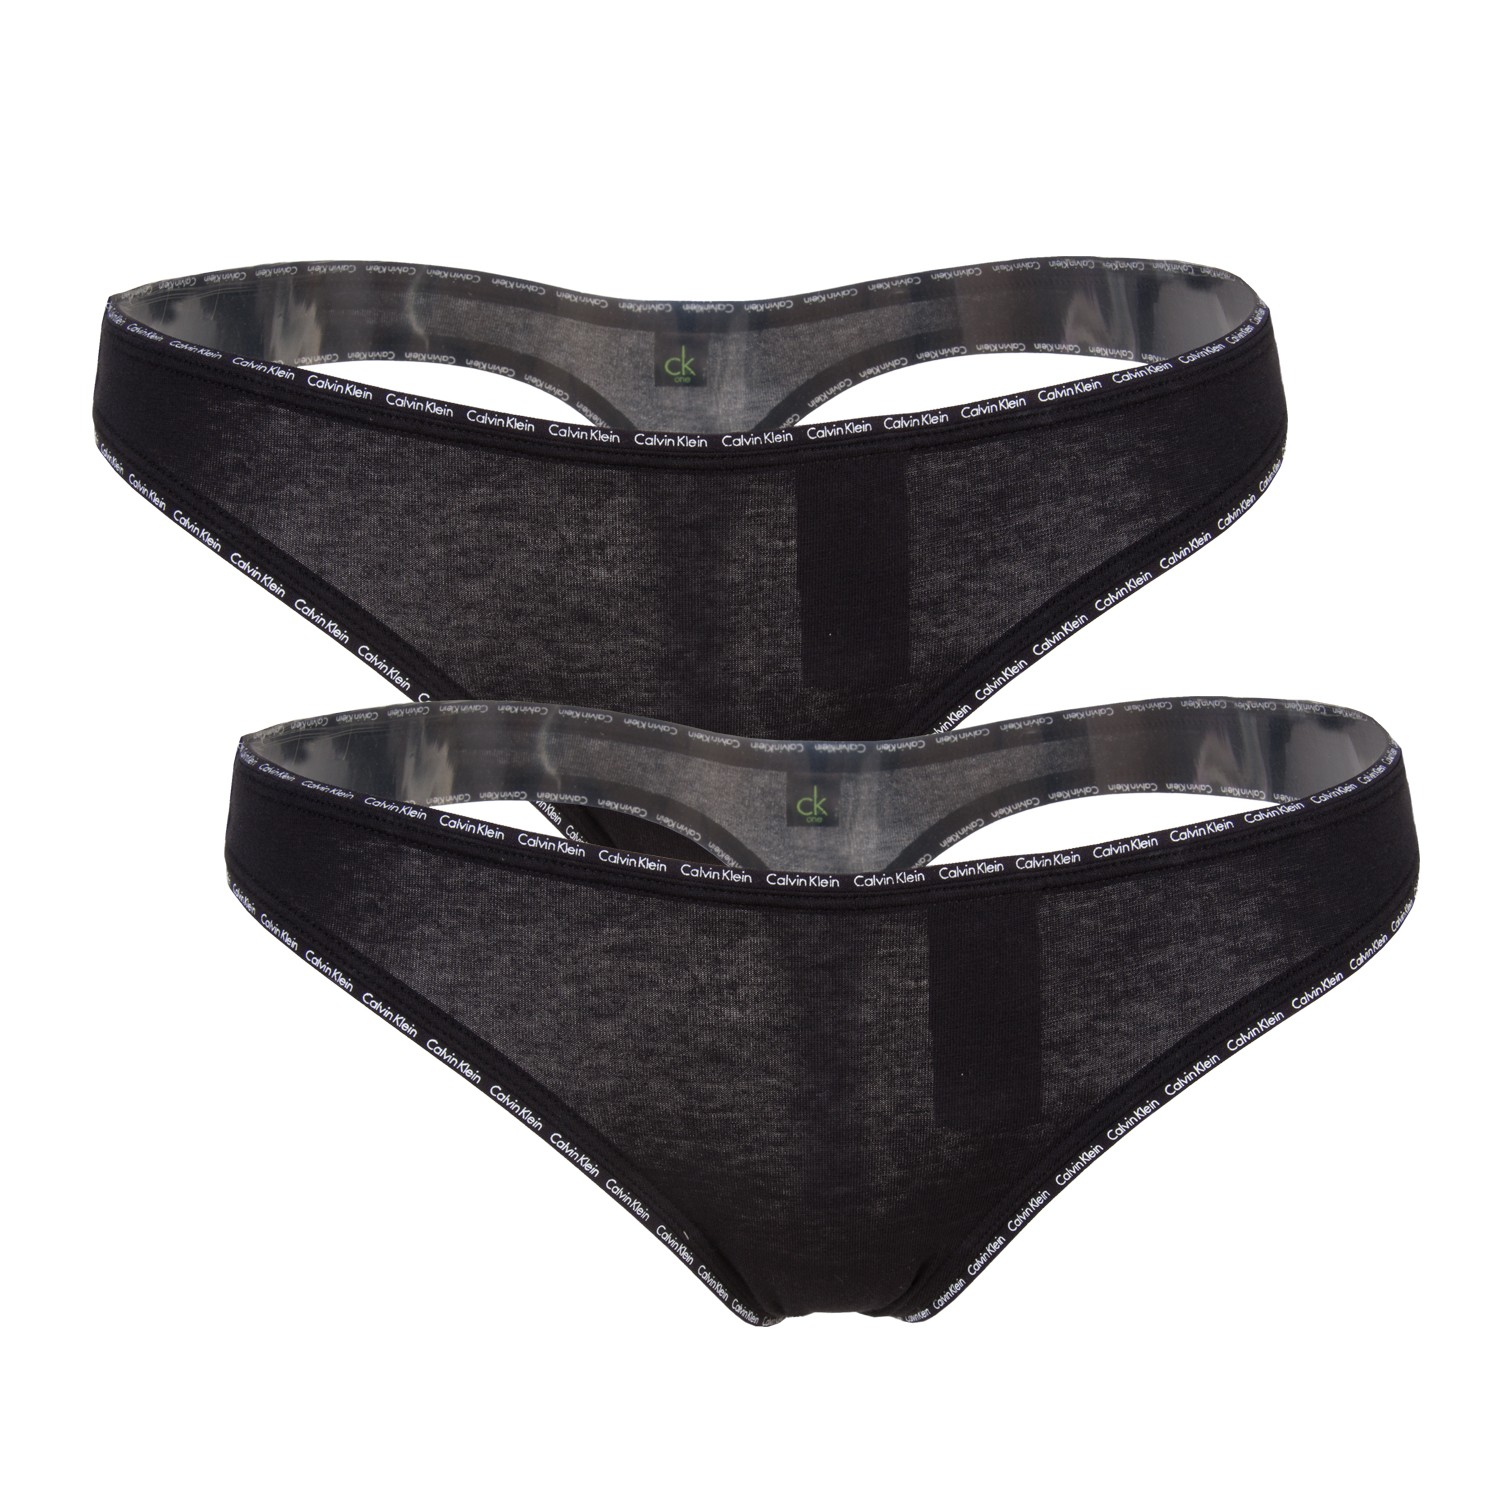 CK One Cotton Thong 001